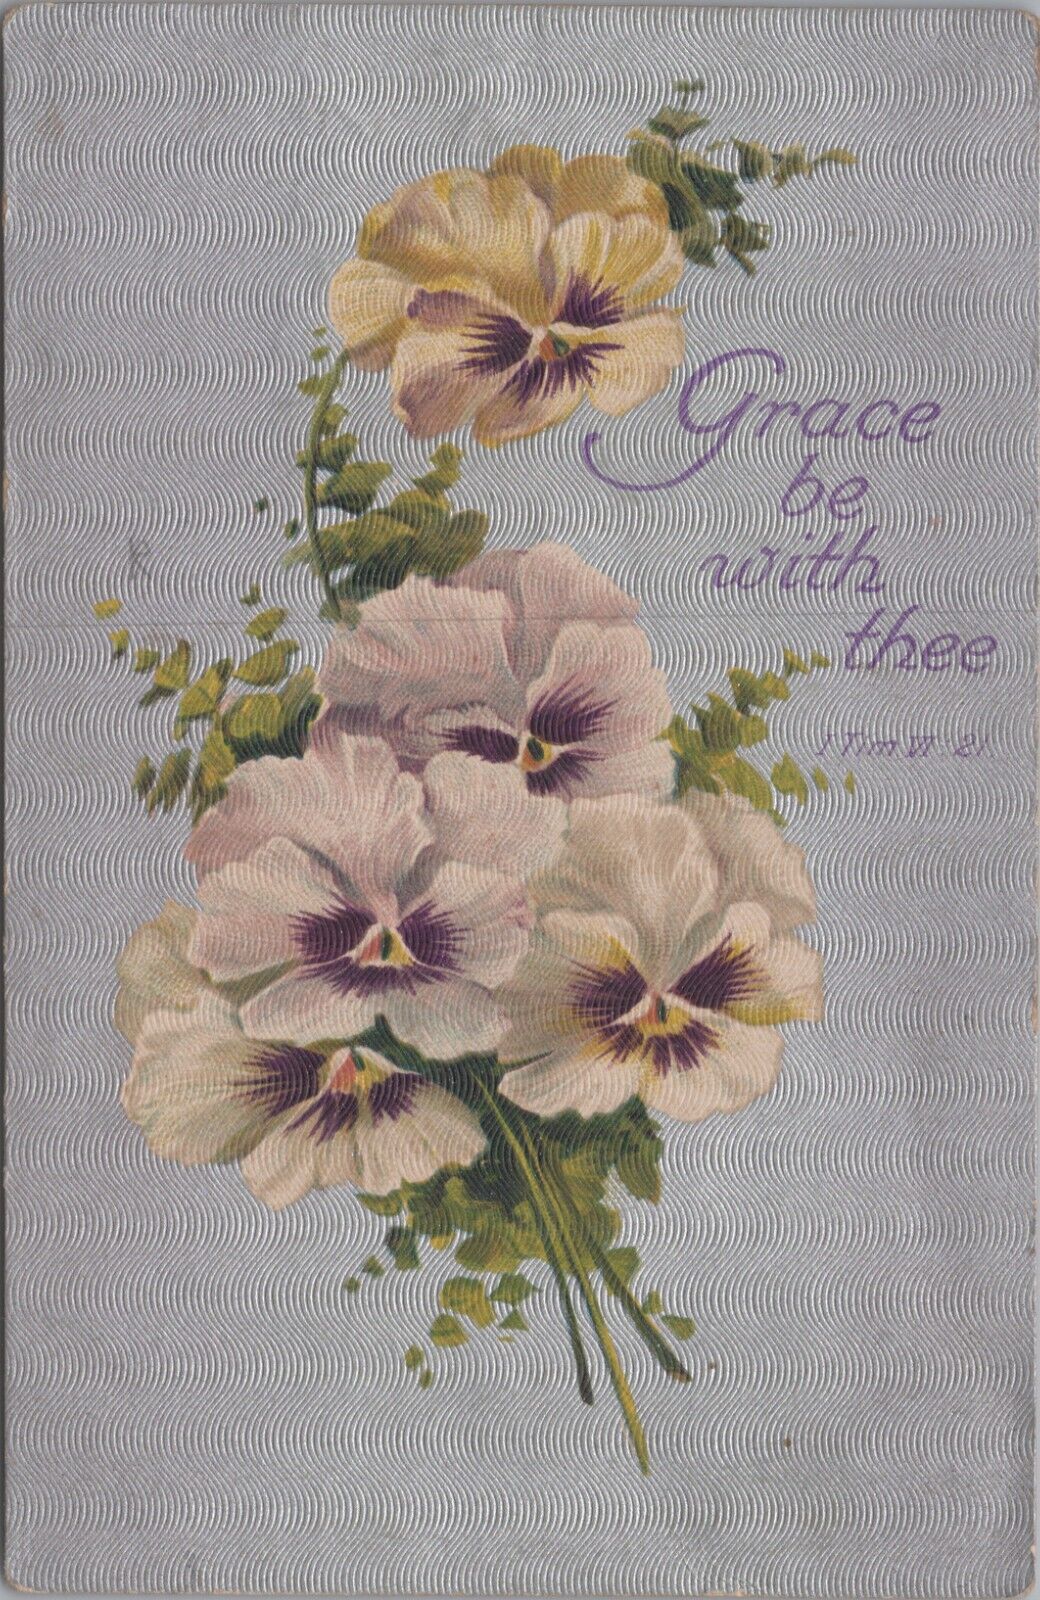 Grace be with Thee Bouquet of Flowers c1910s Postcard 6593d2 MR ALE